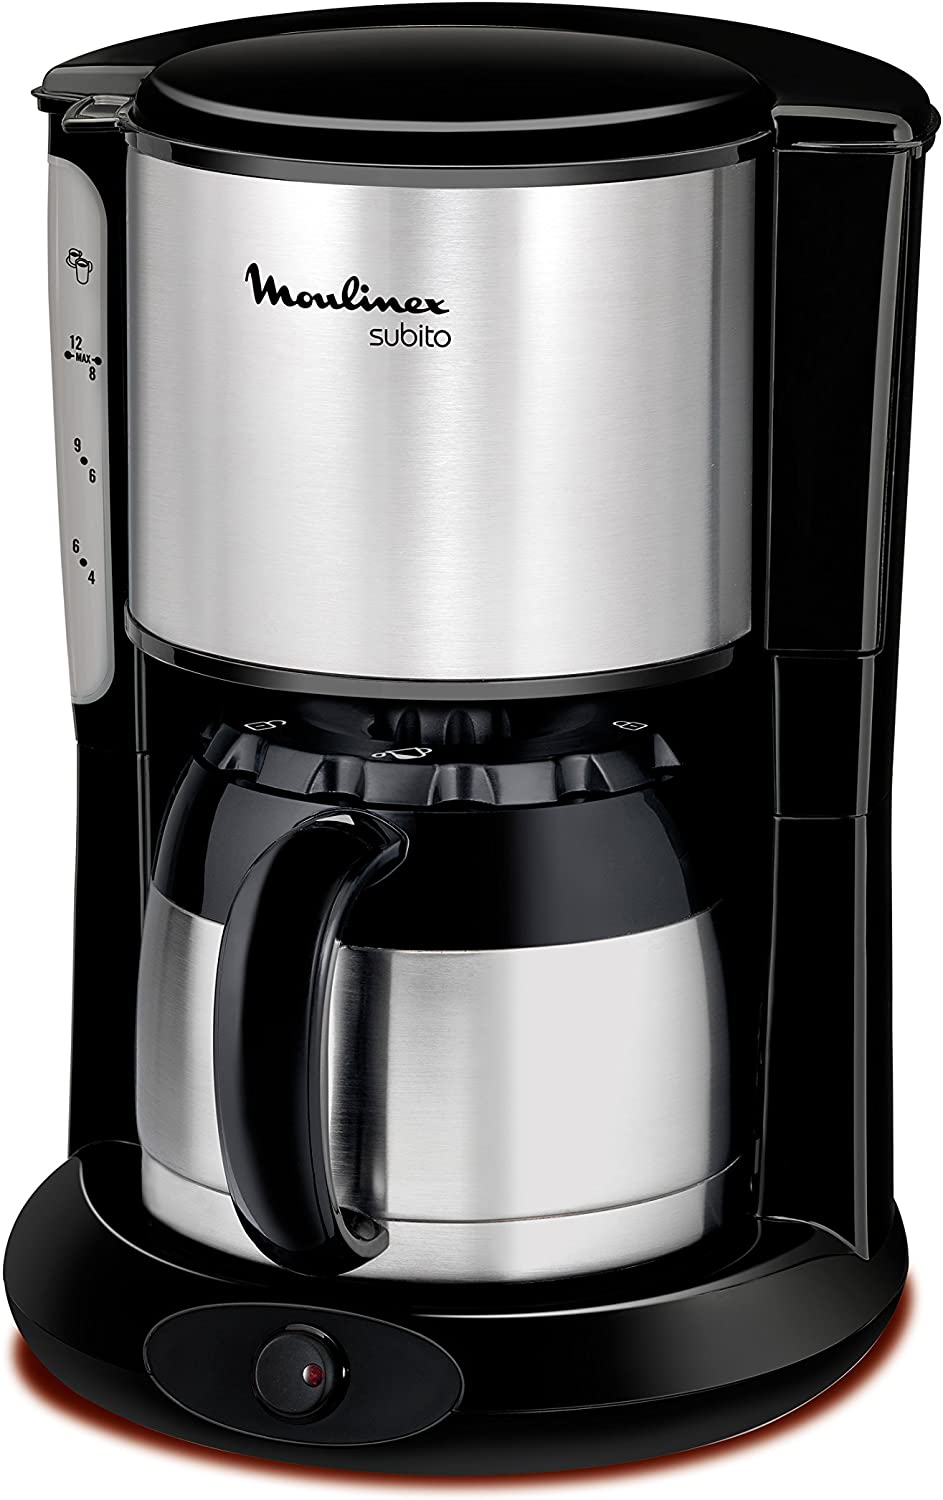 Moulinex FT360811 Subito Thermal Coffee Machine, Stainless Steel, Black